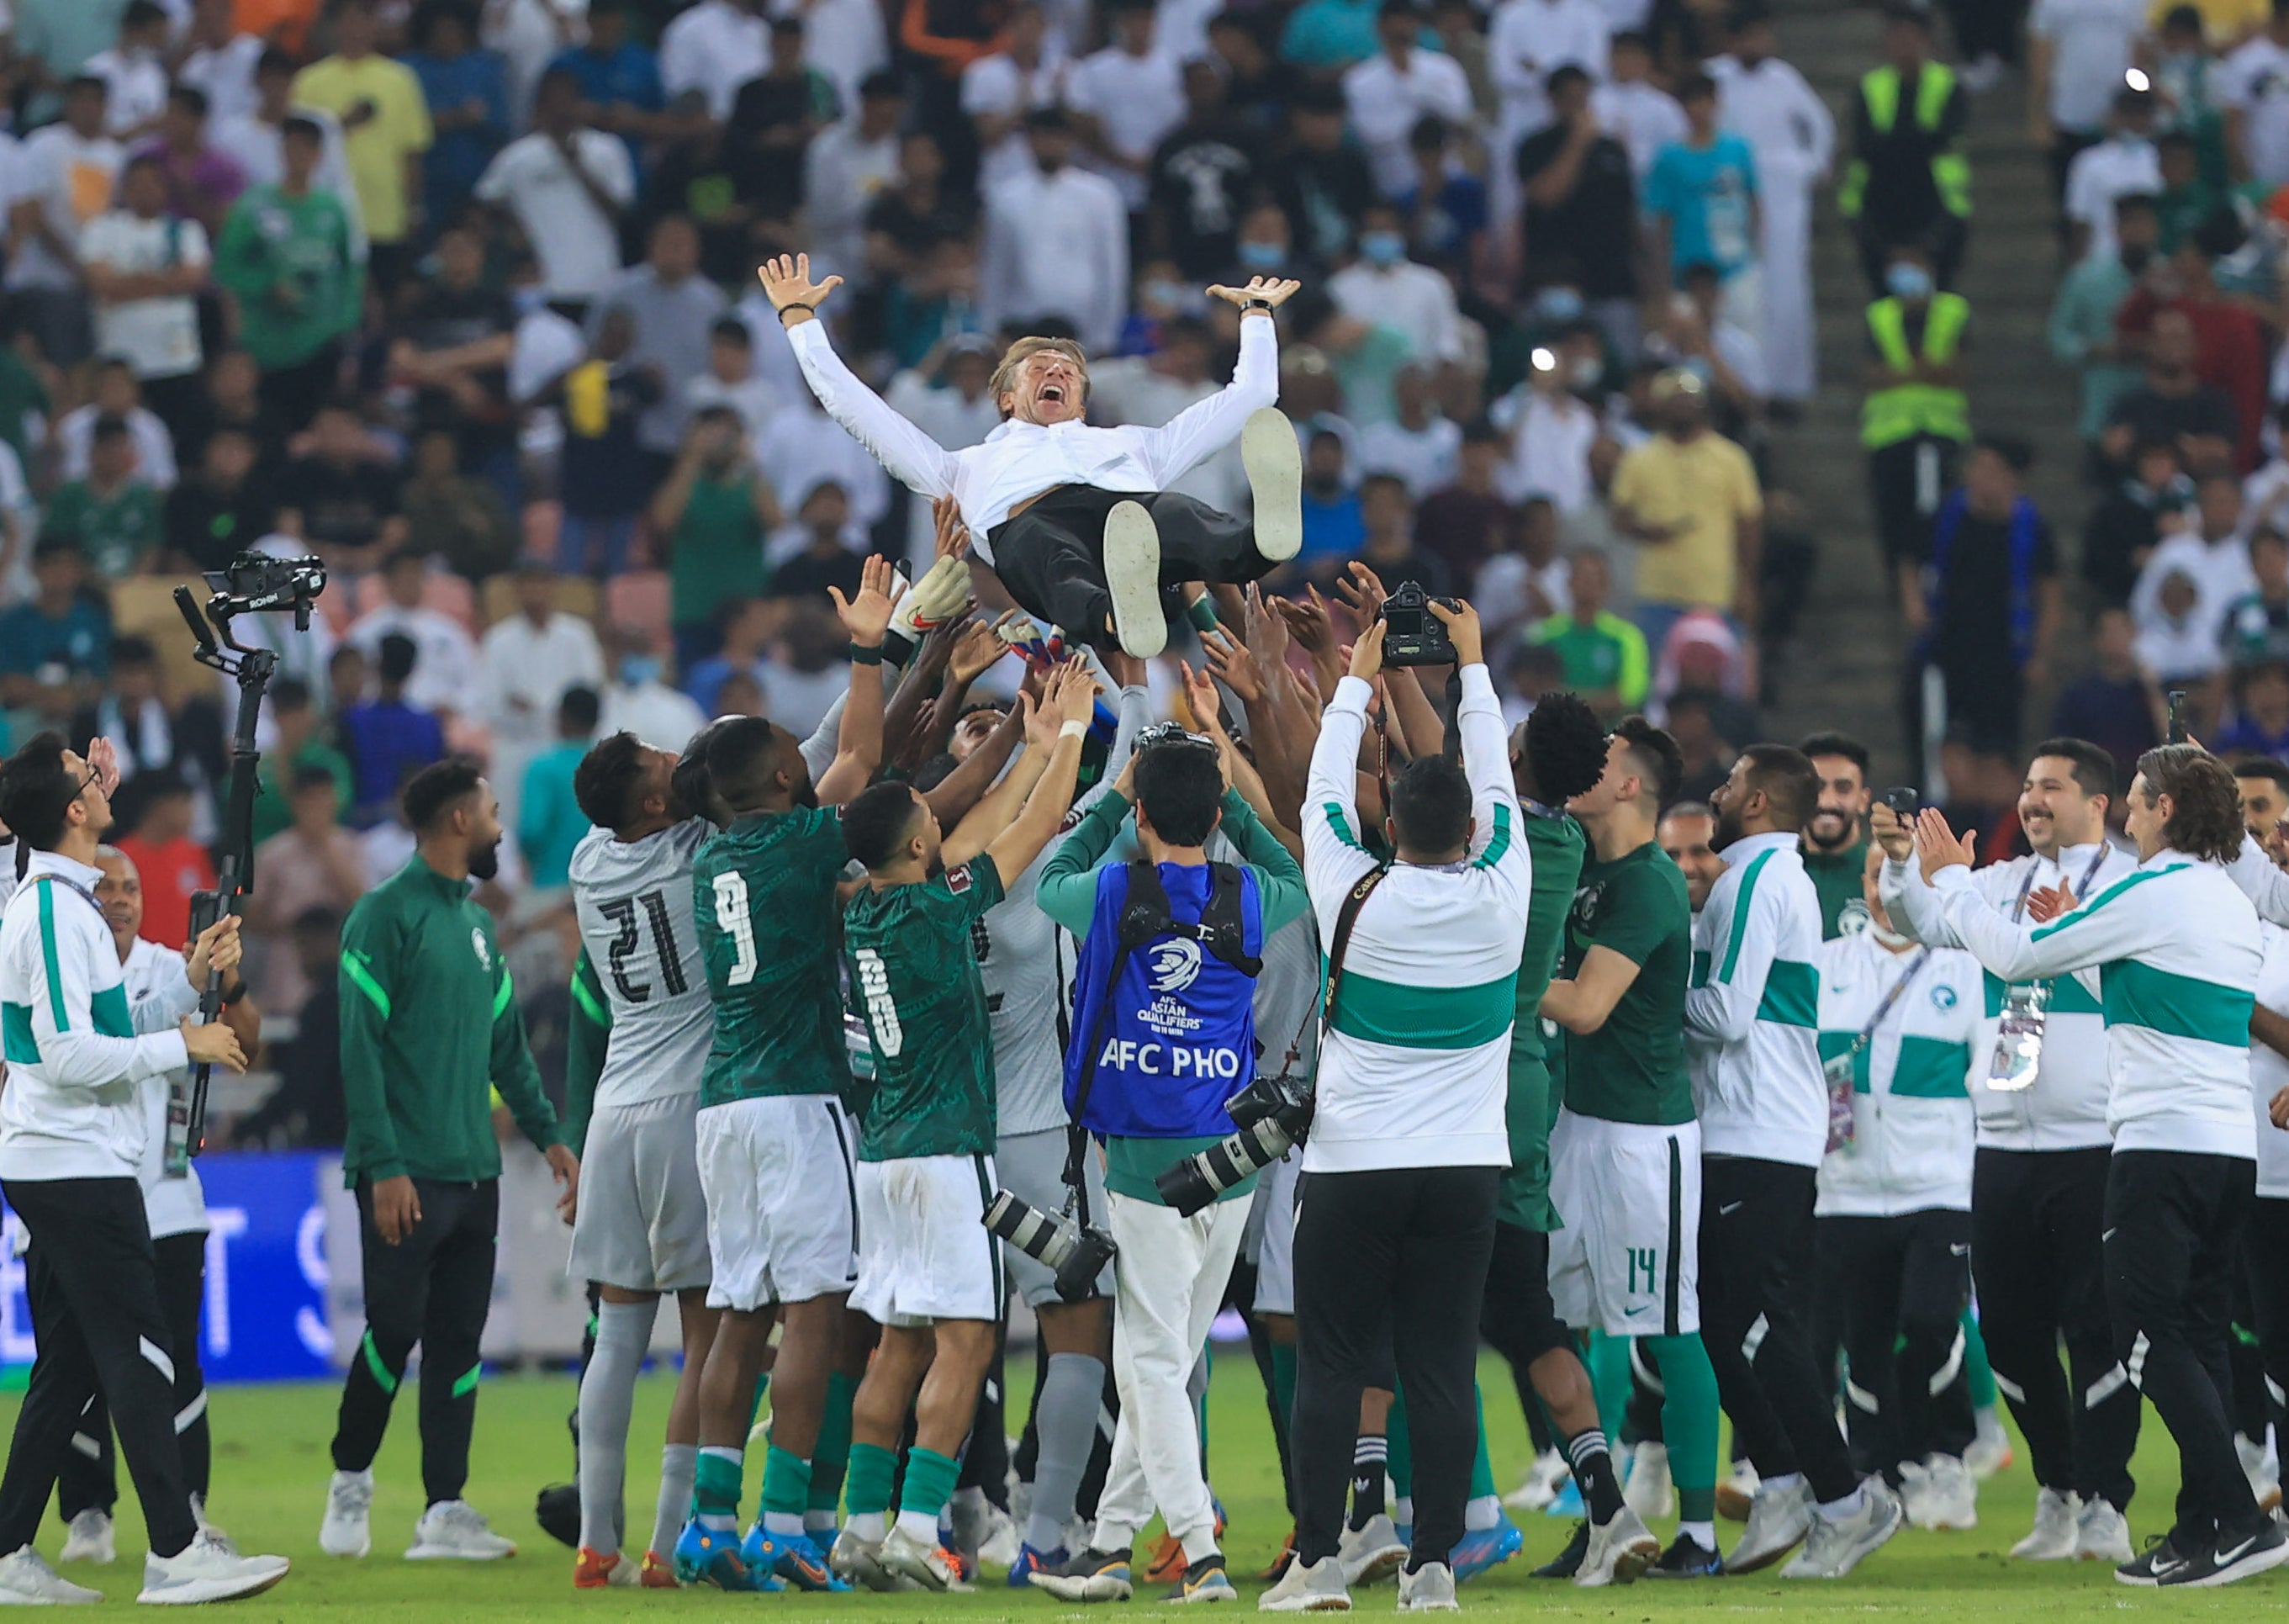 Renard led Saudi Arabia to qualification for Qatar to keep up his impressive record in international maangement